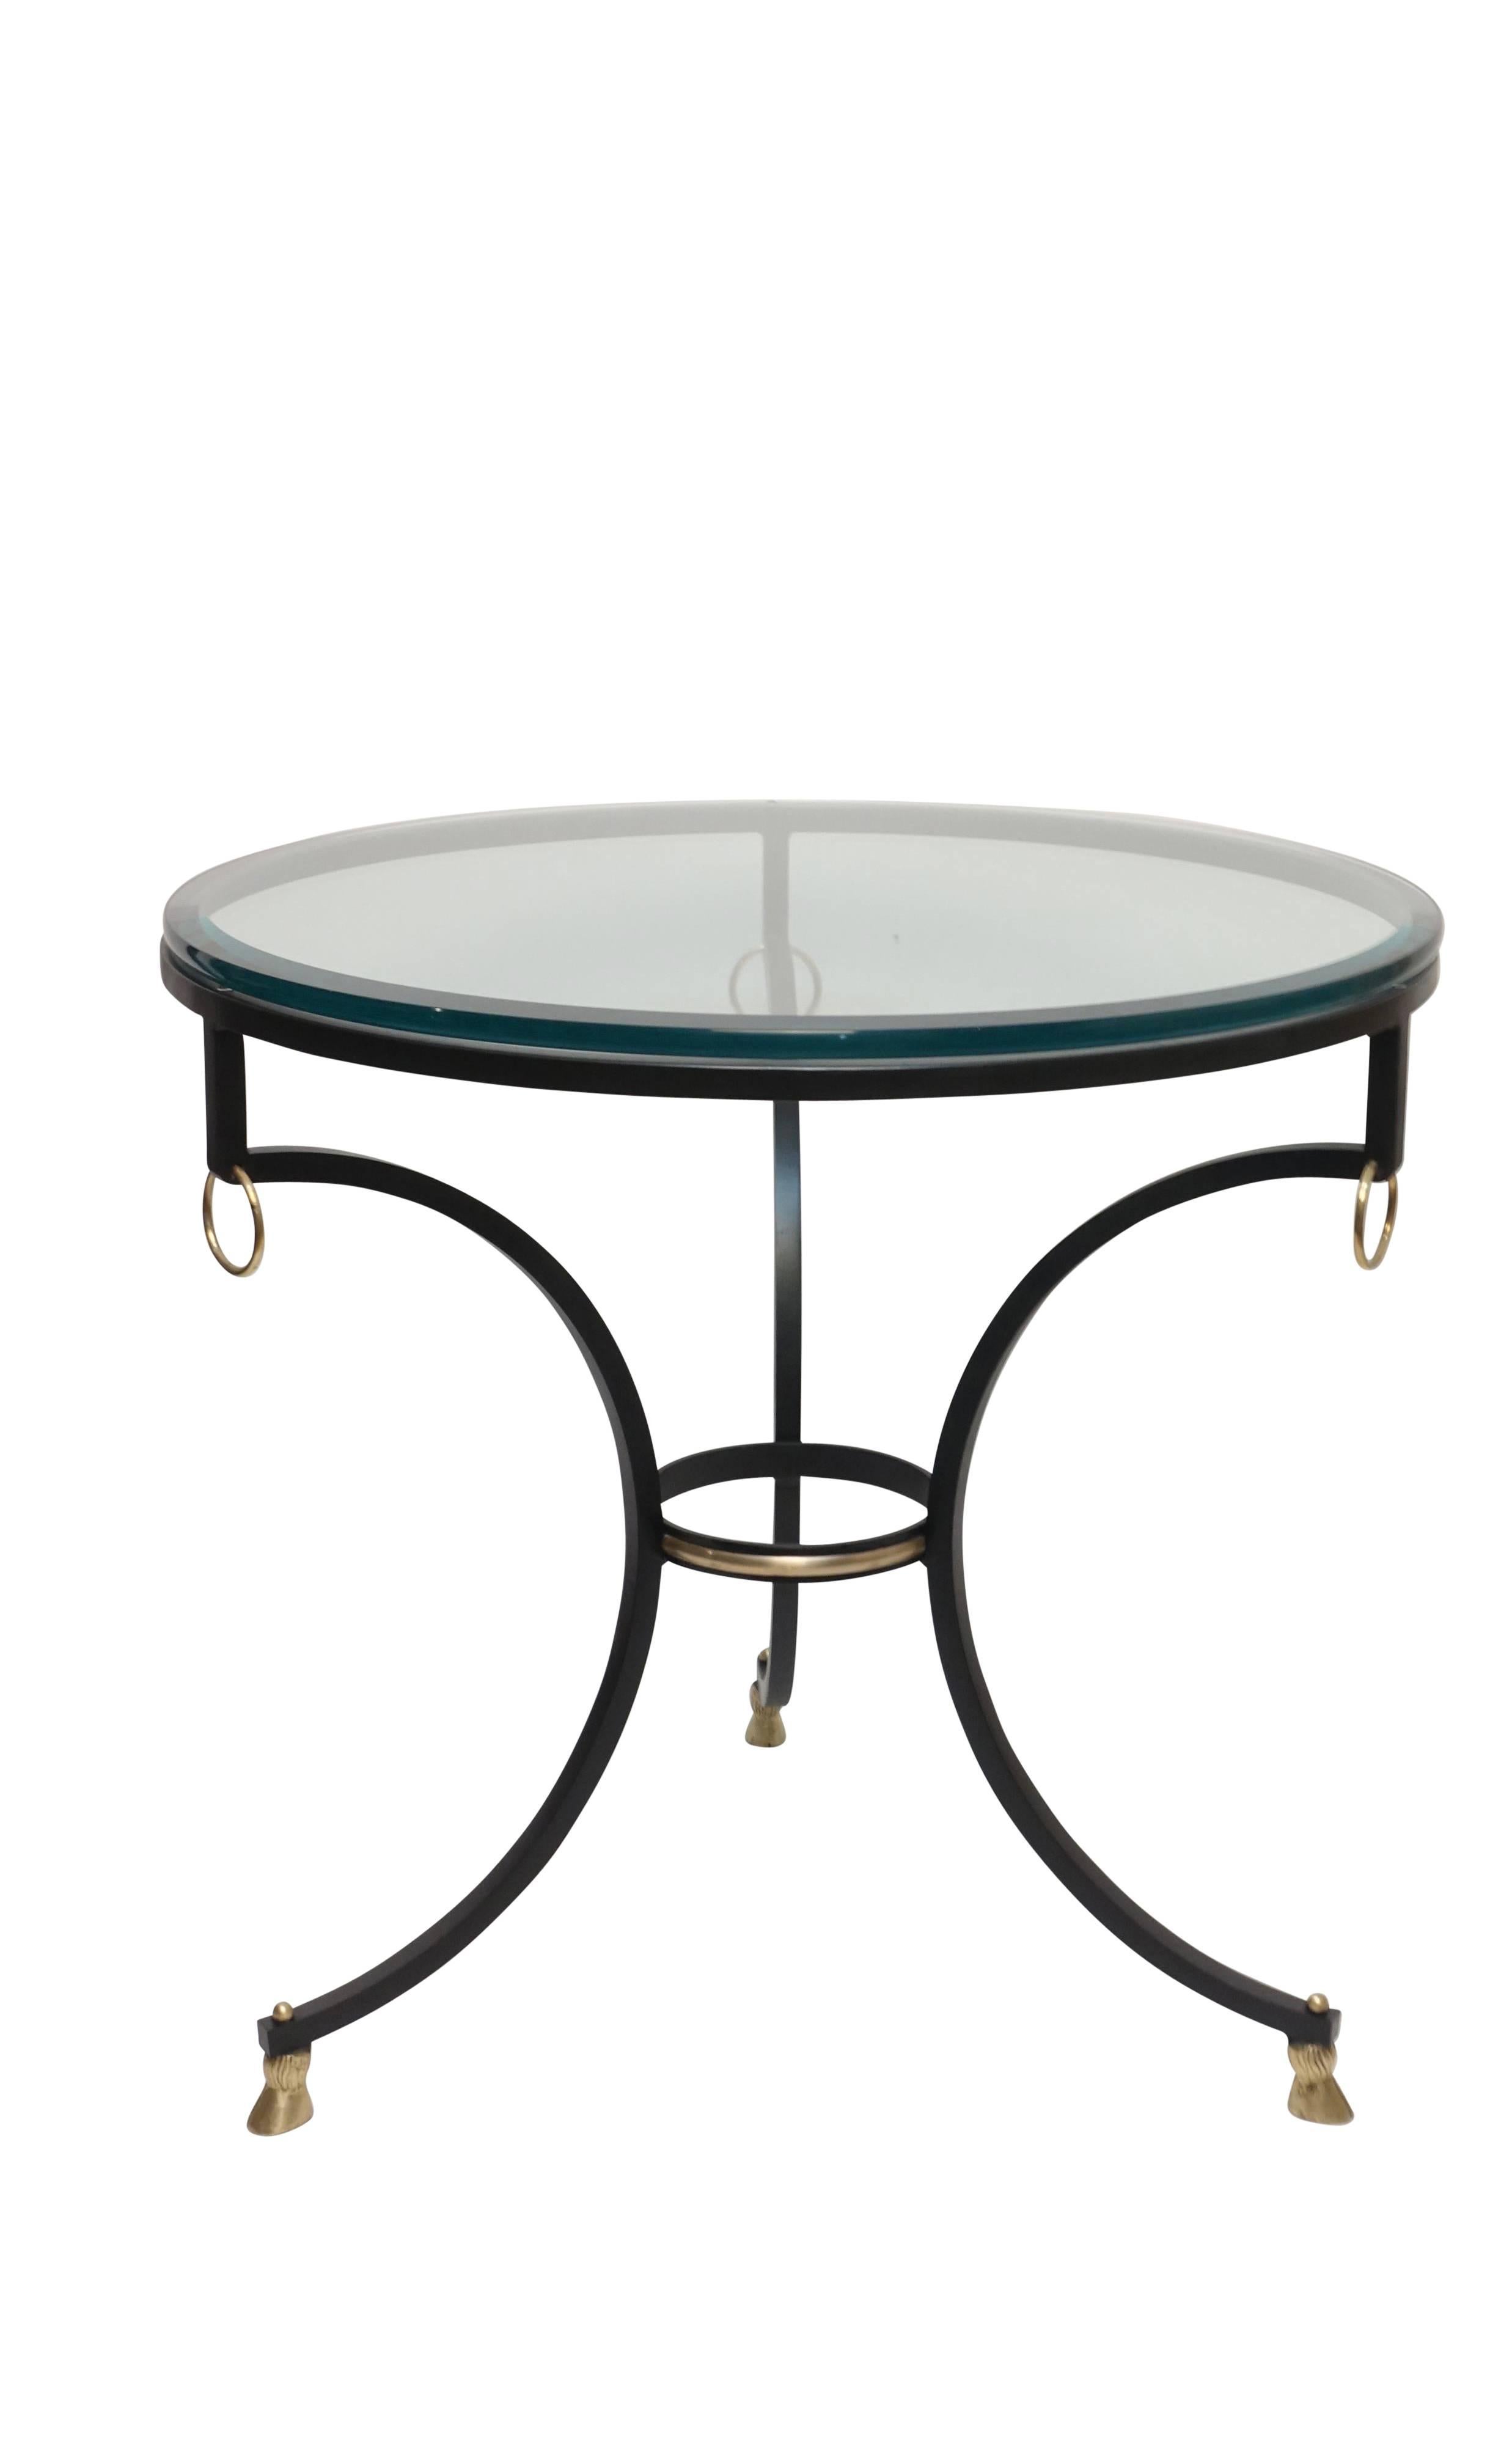 American Neoclassical Style Iron and Brass Side Table